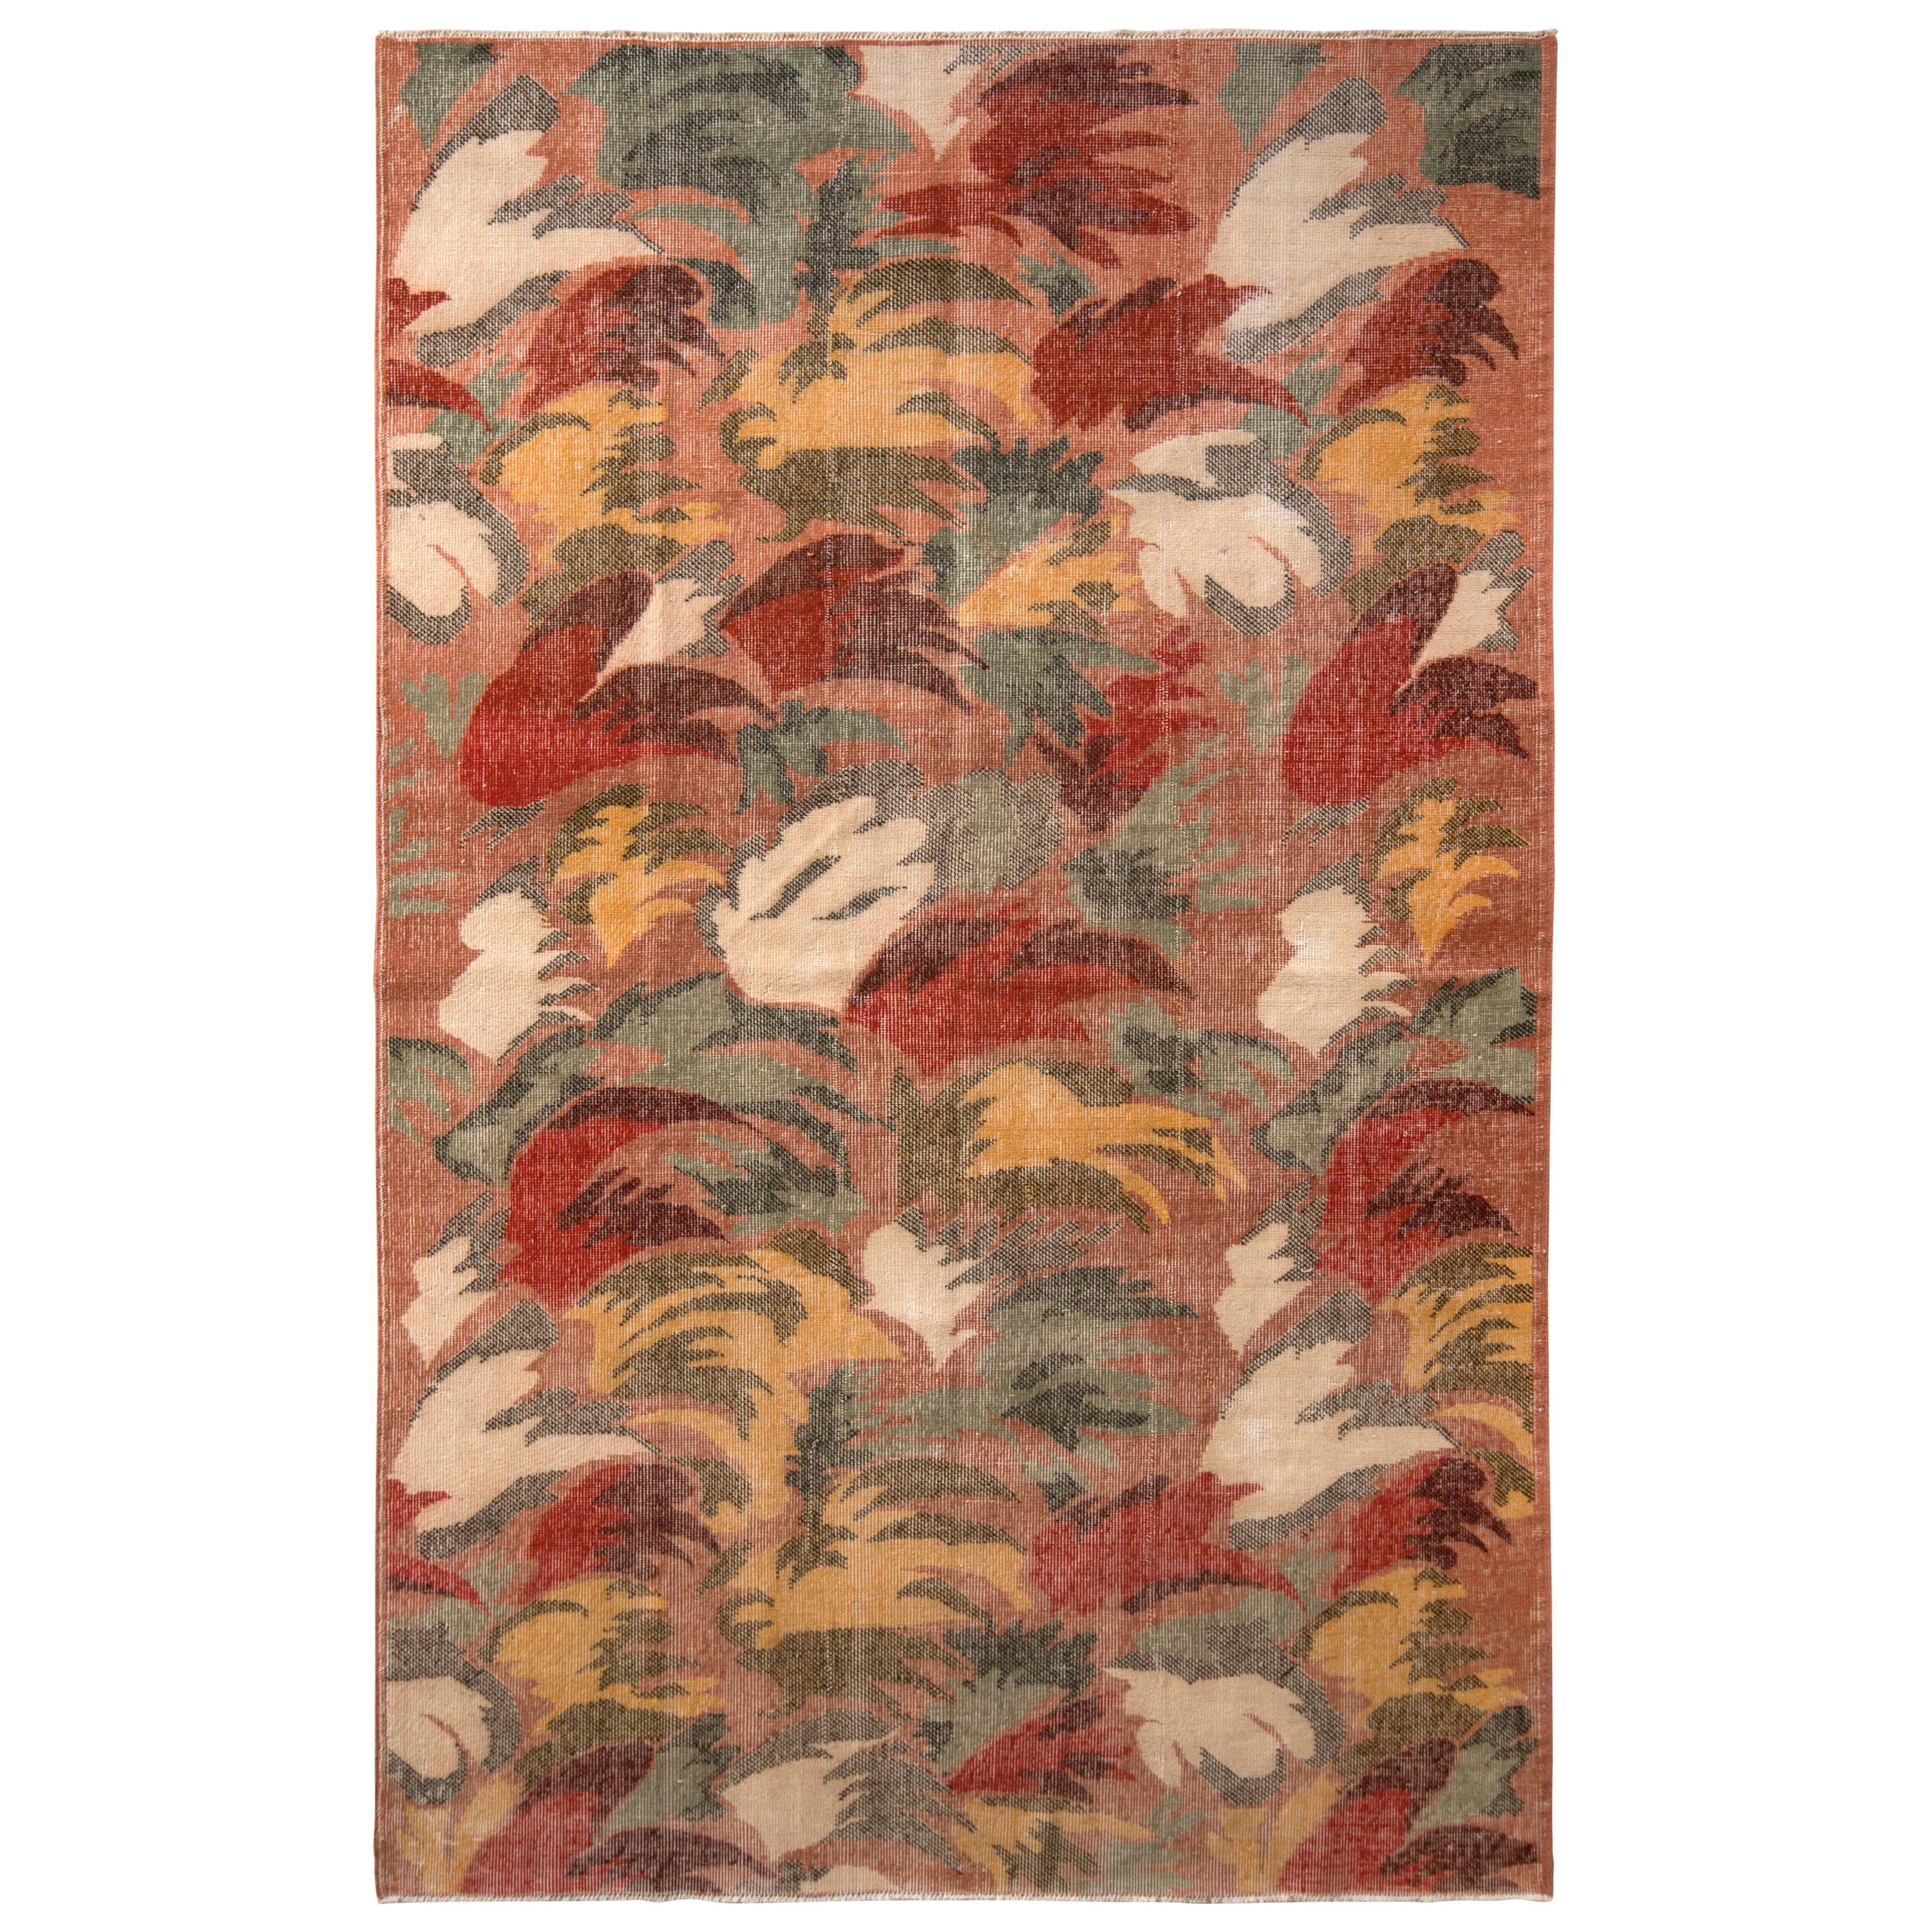 1960s Distressed Midcentury Art Deco Rug Pink-Red and Green Floral Pattern